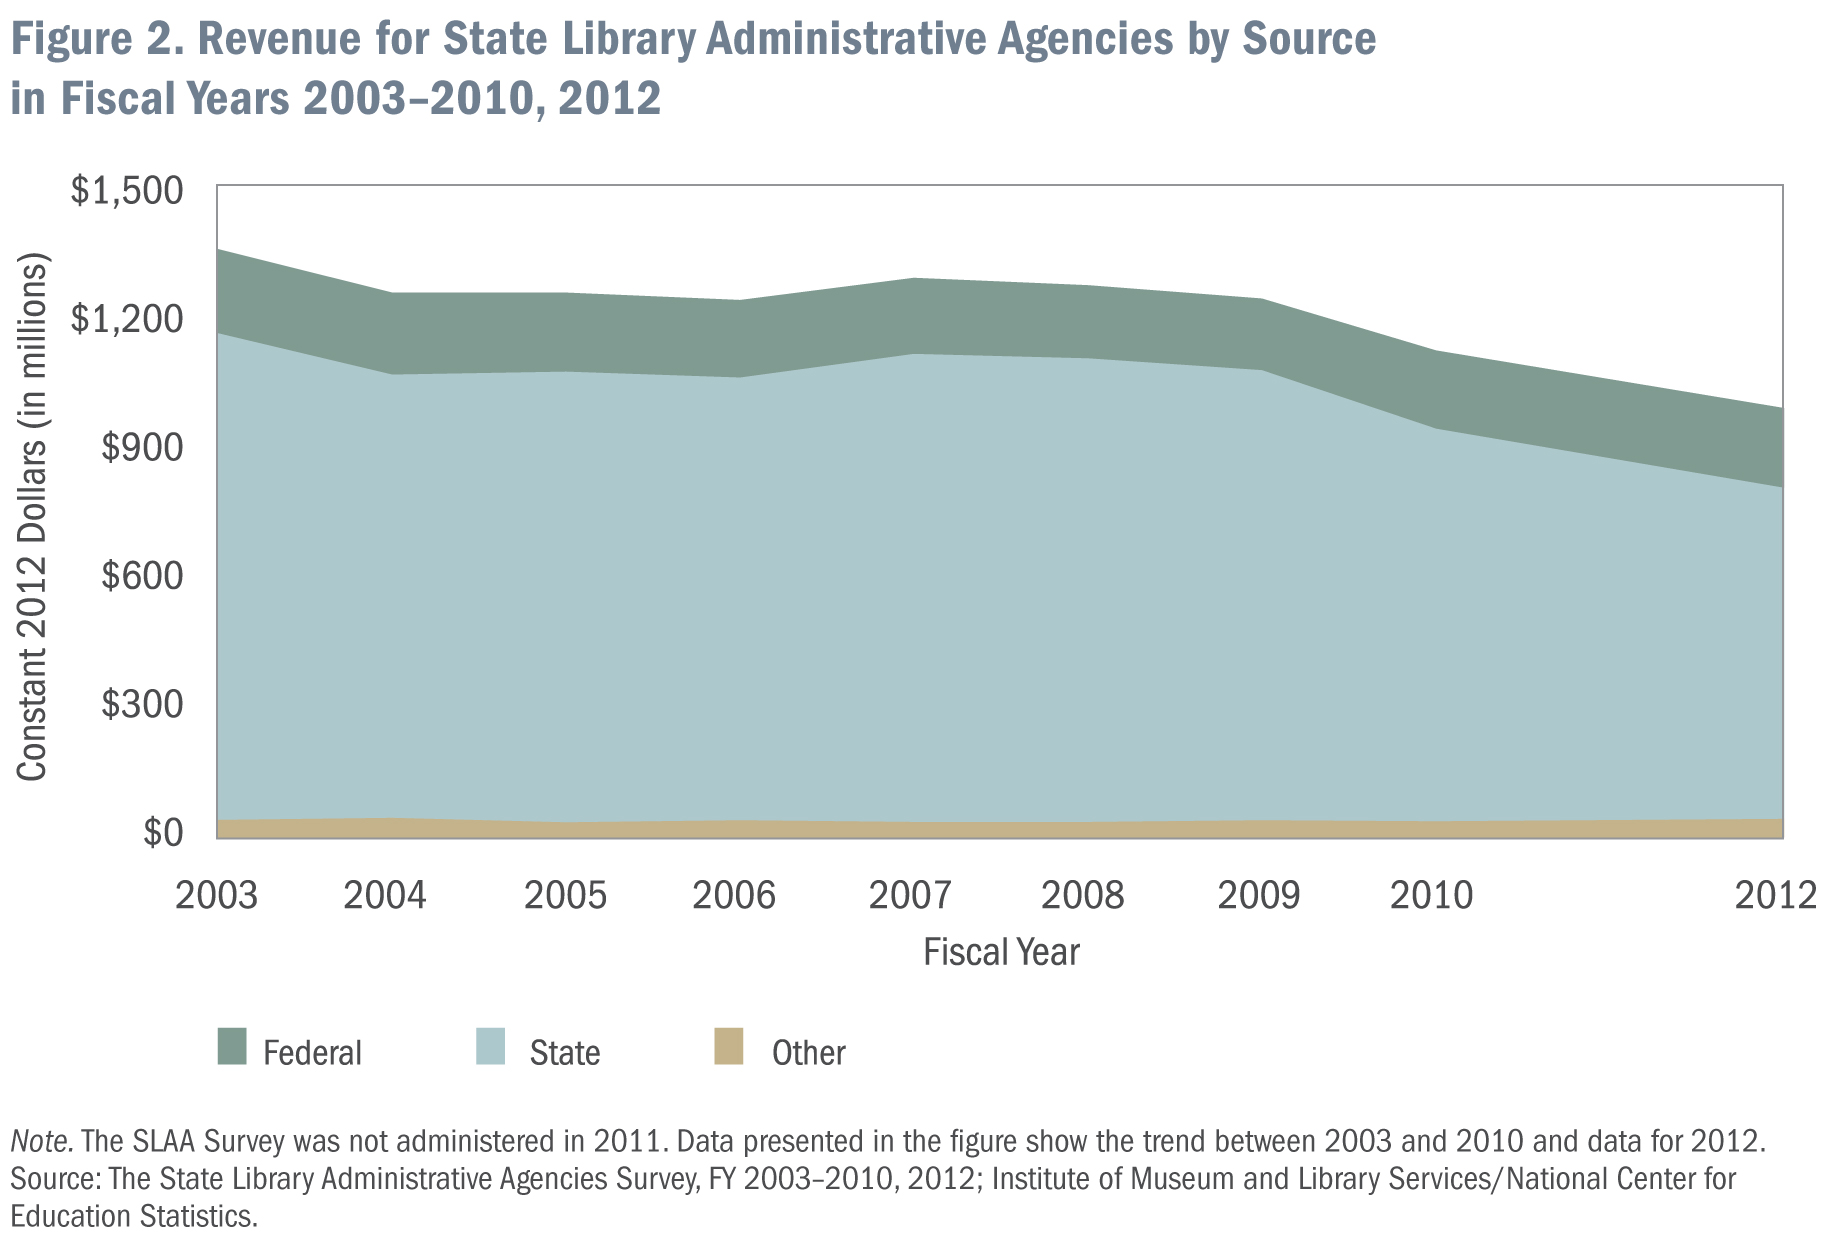 Figure 2: Revenue for State Library Administrative Agencies by Source